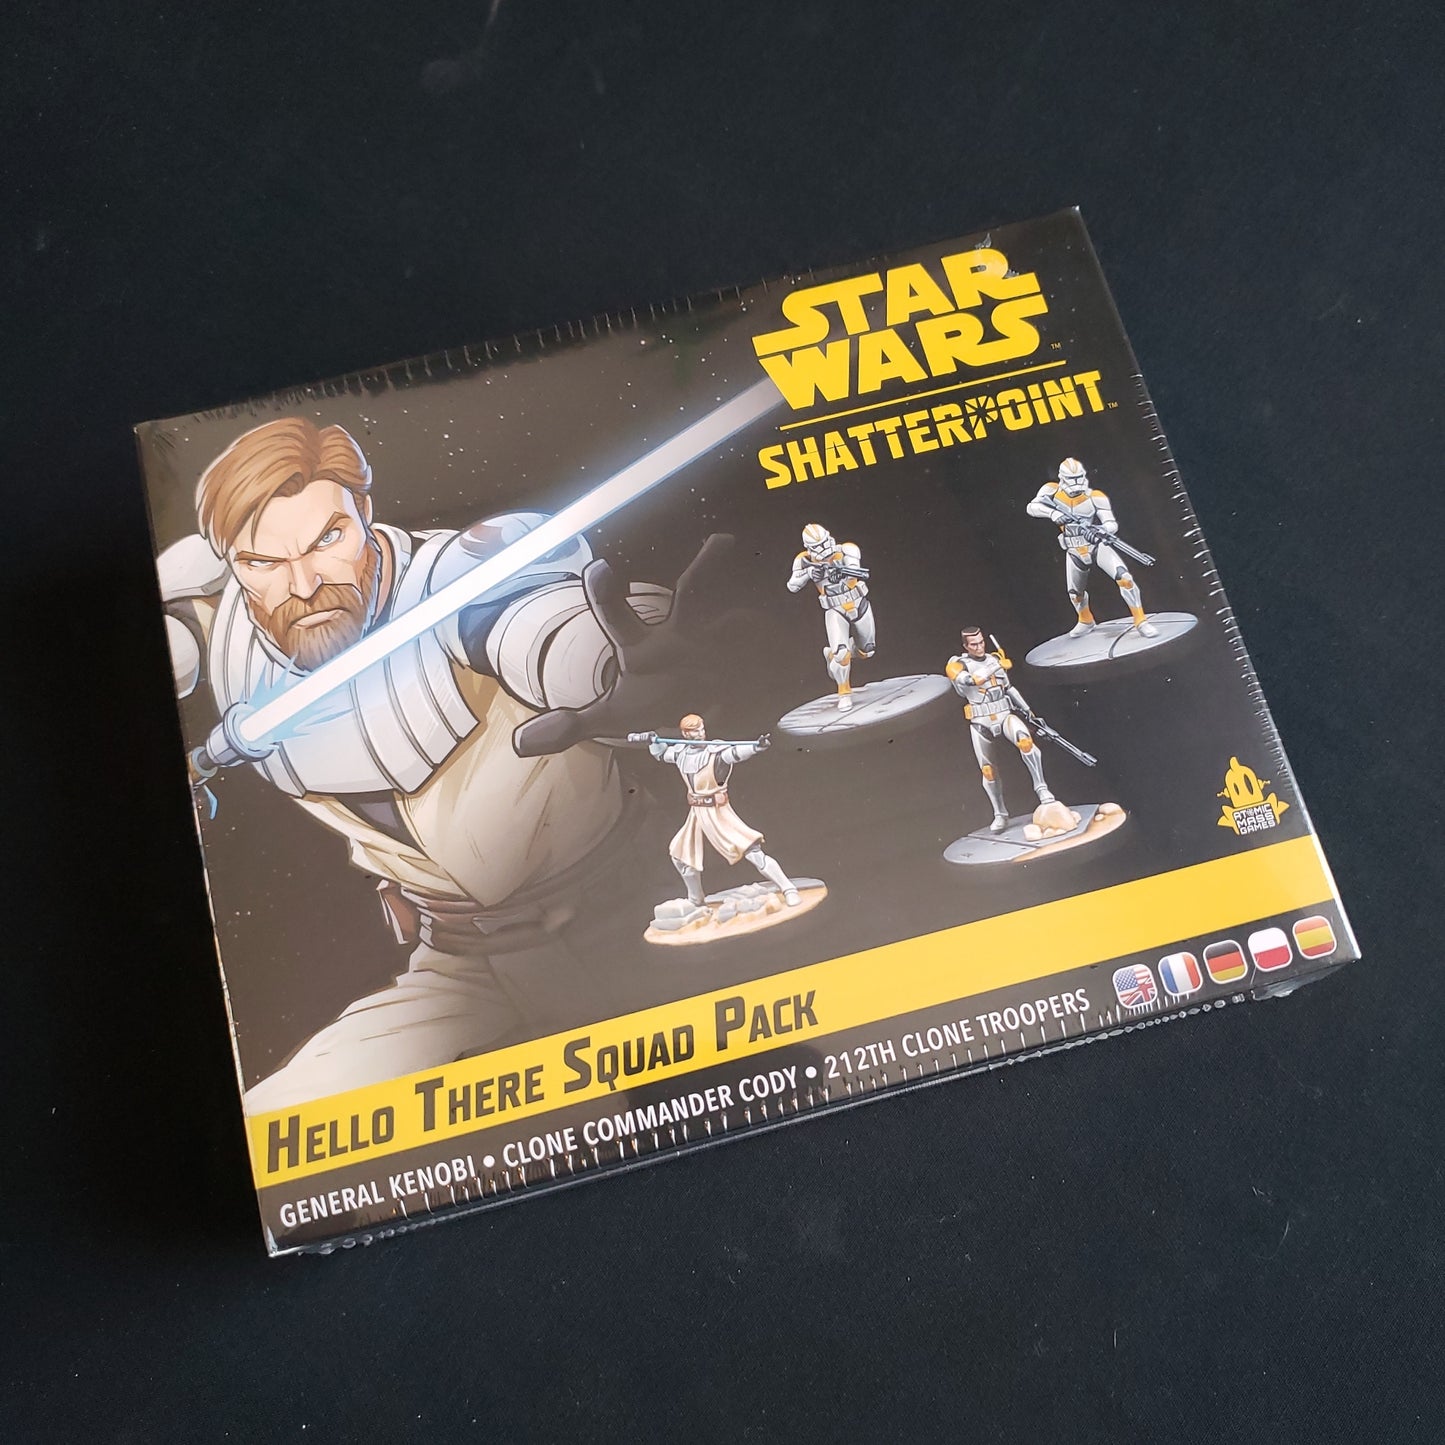 Image shows the front of the box for the Hello There Squad Pack expansion for the board game Star Wars: Shatterpoint